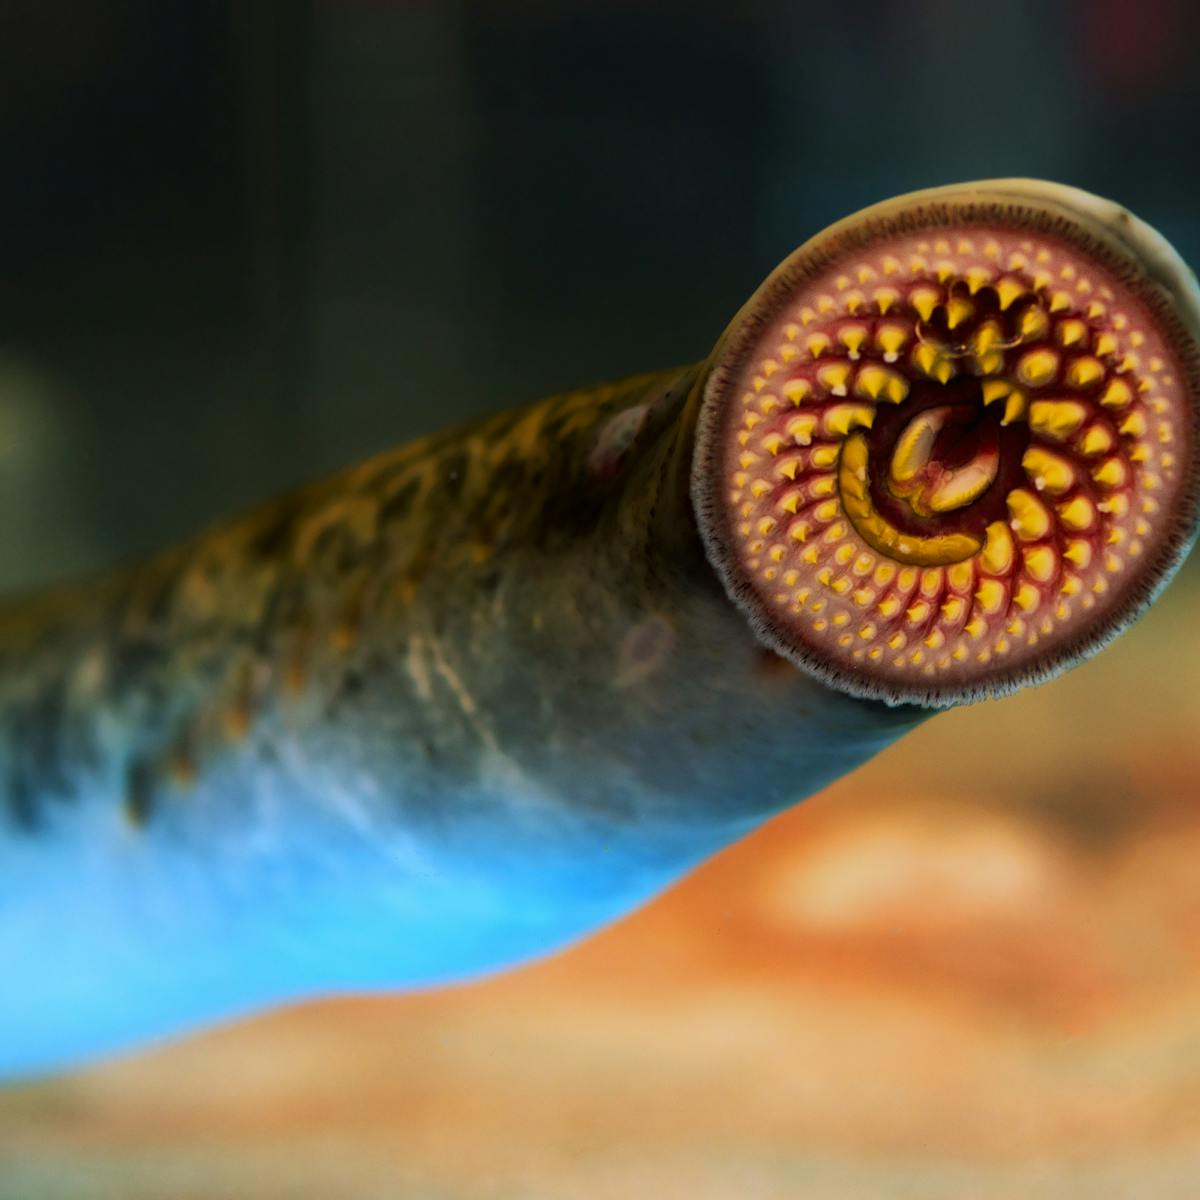 Vampire Fish Gorged On Great Lakes, What Are Lampreys